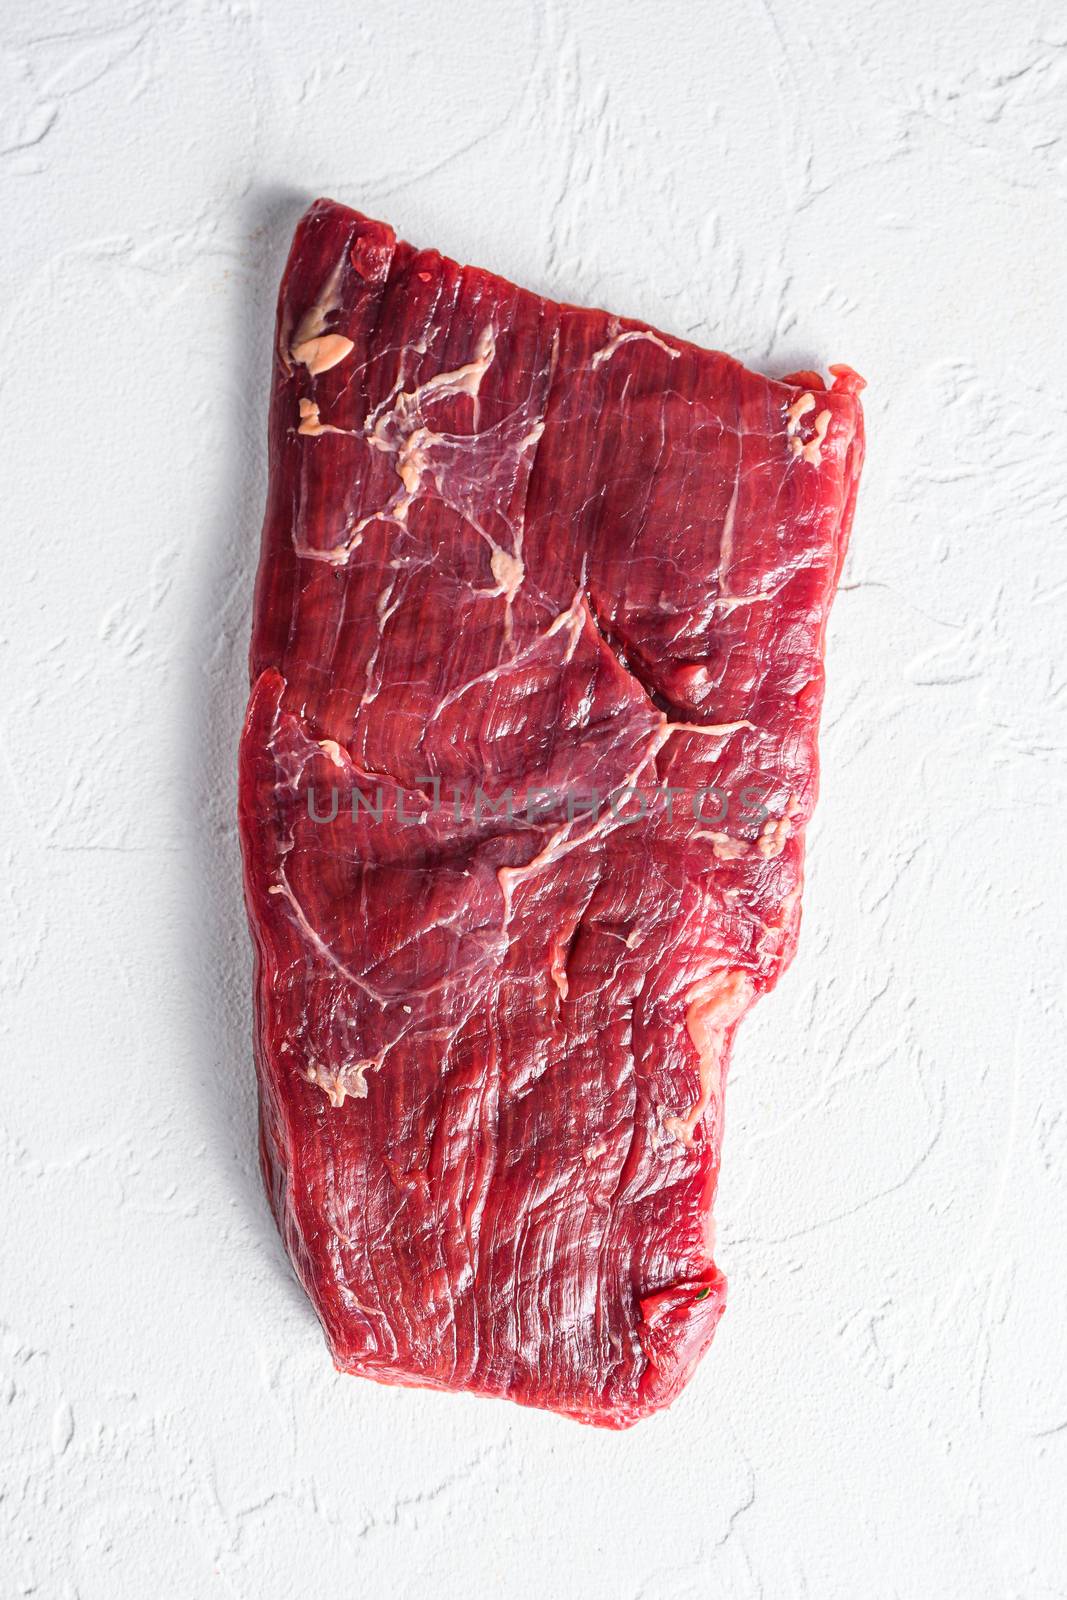 Raw skirt or flank steak,on a white stone background top view vertical by Ilianesolenyi